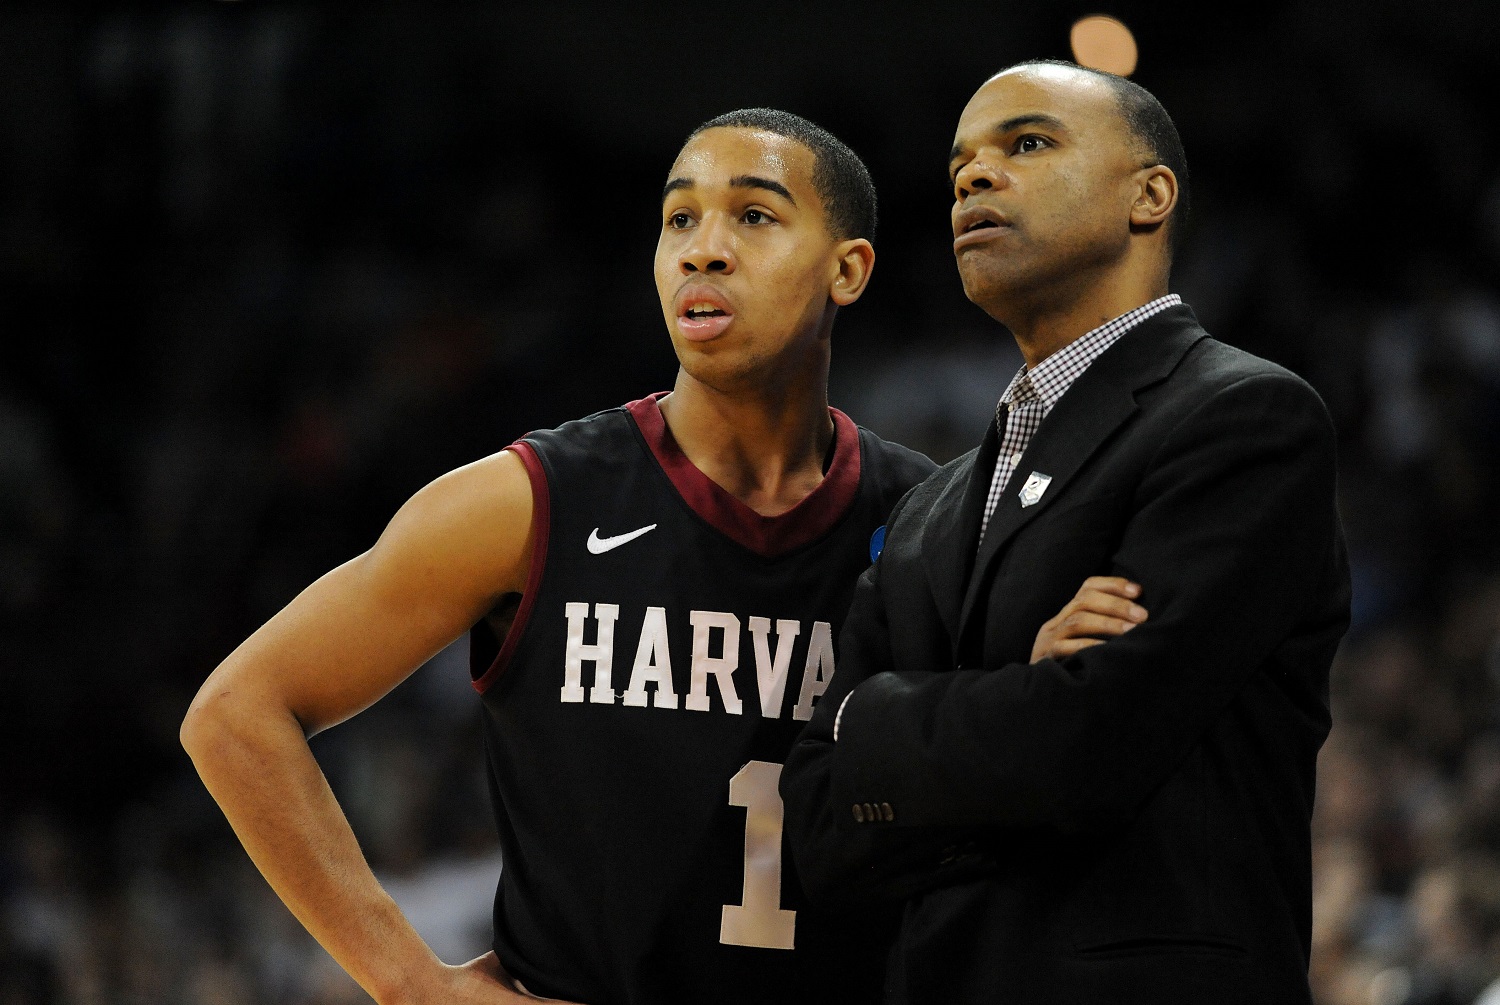 SPOKANE, WA - MARCH 22:  Head coach Tommy Amaker talks to Siyani Chambers #1 of the Harvard Crimson in the first half against the Michigan State Spartans during the Third Round of the 2014 NCAA Basketball Tournament at Spokane Veterans Memorial Arena on March 22, 2014 in Spokane, Washington.  (Photo by Steve Dykes/Getty Images)